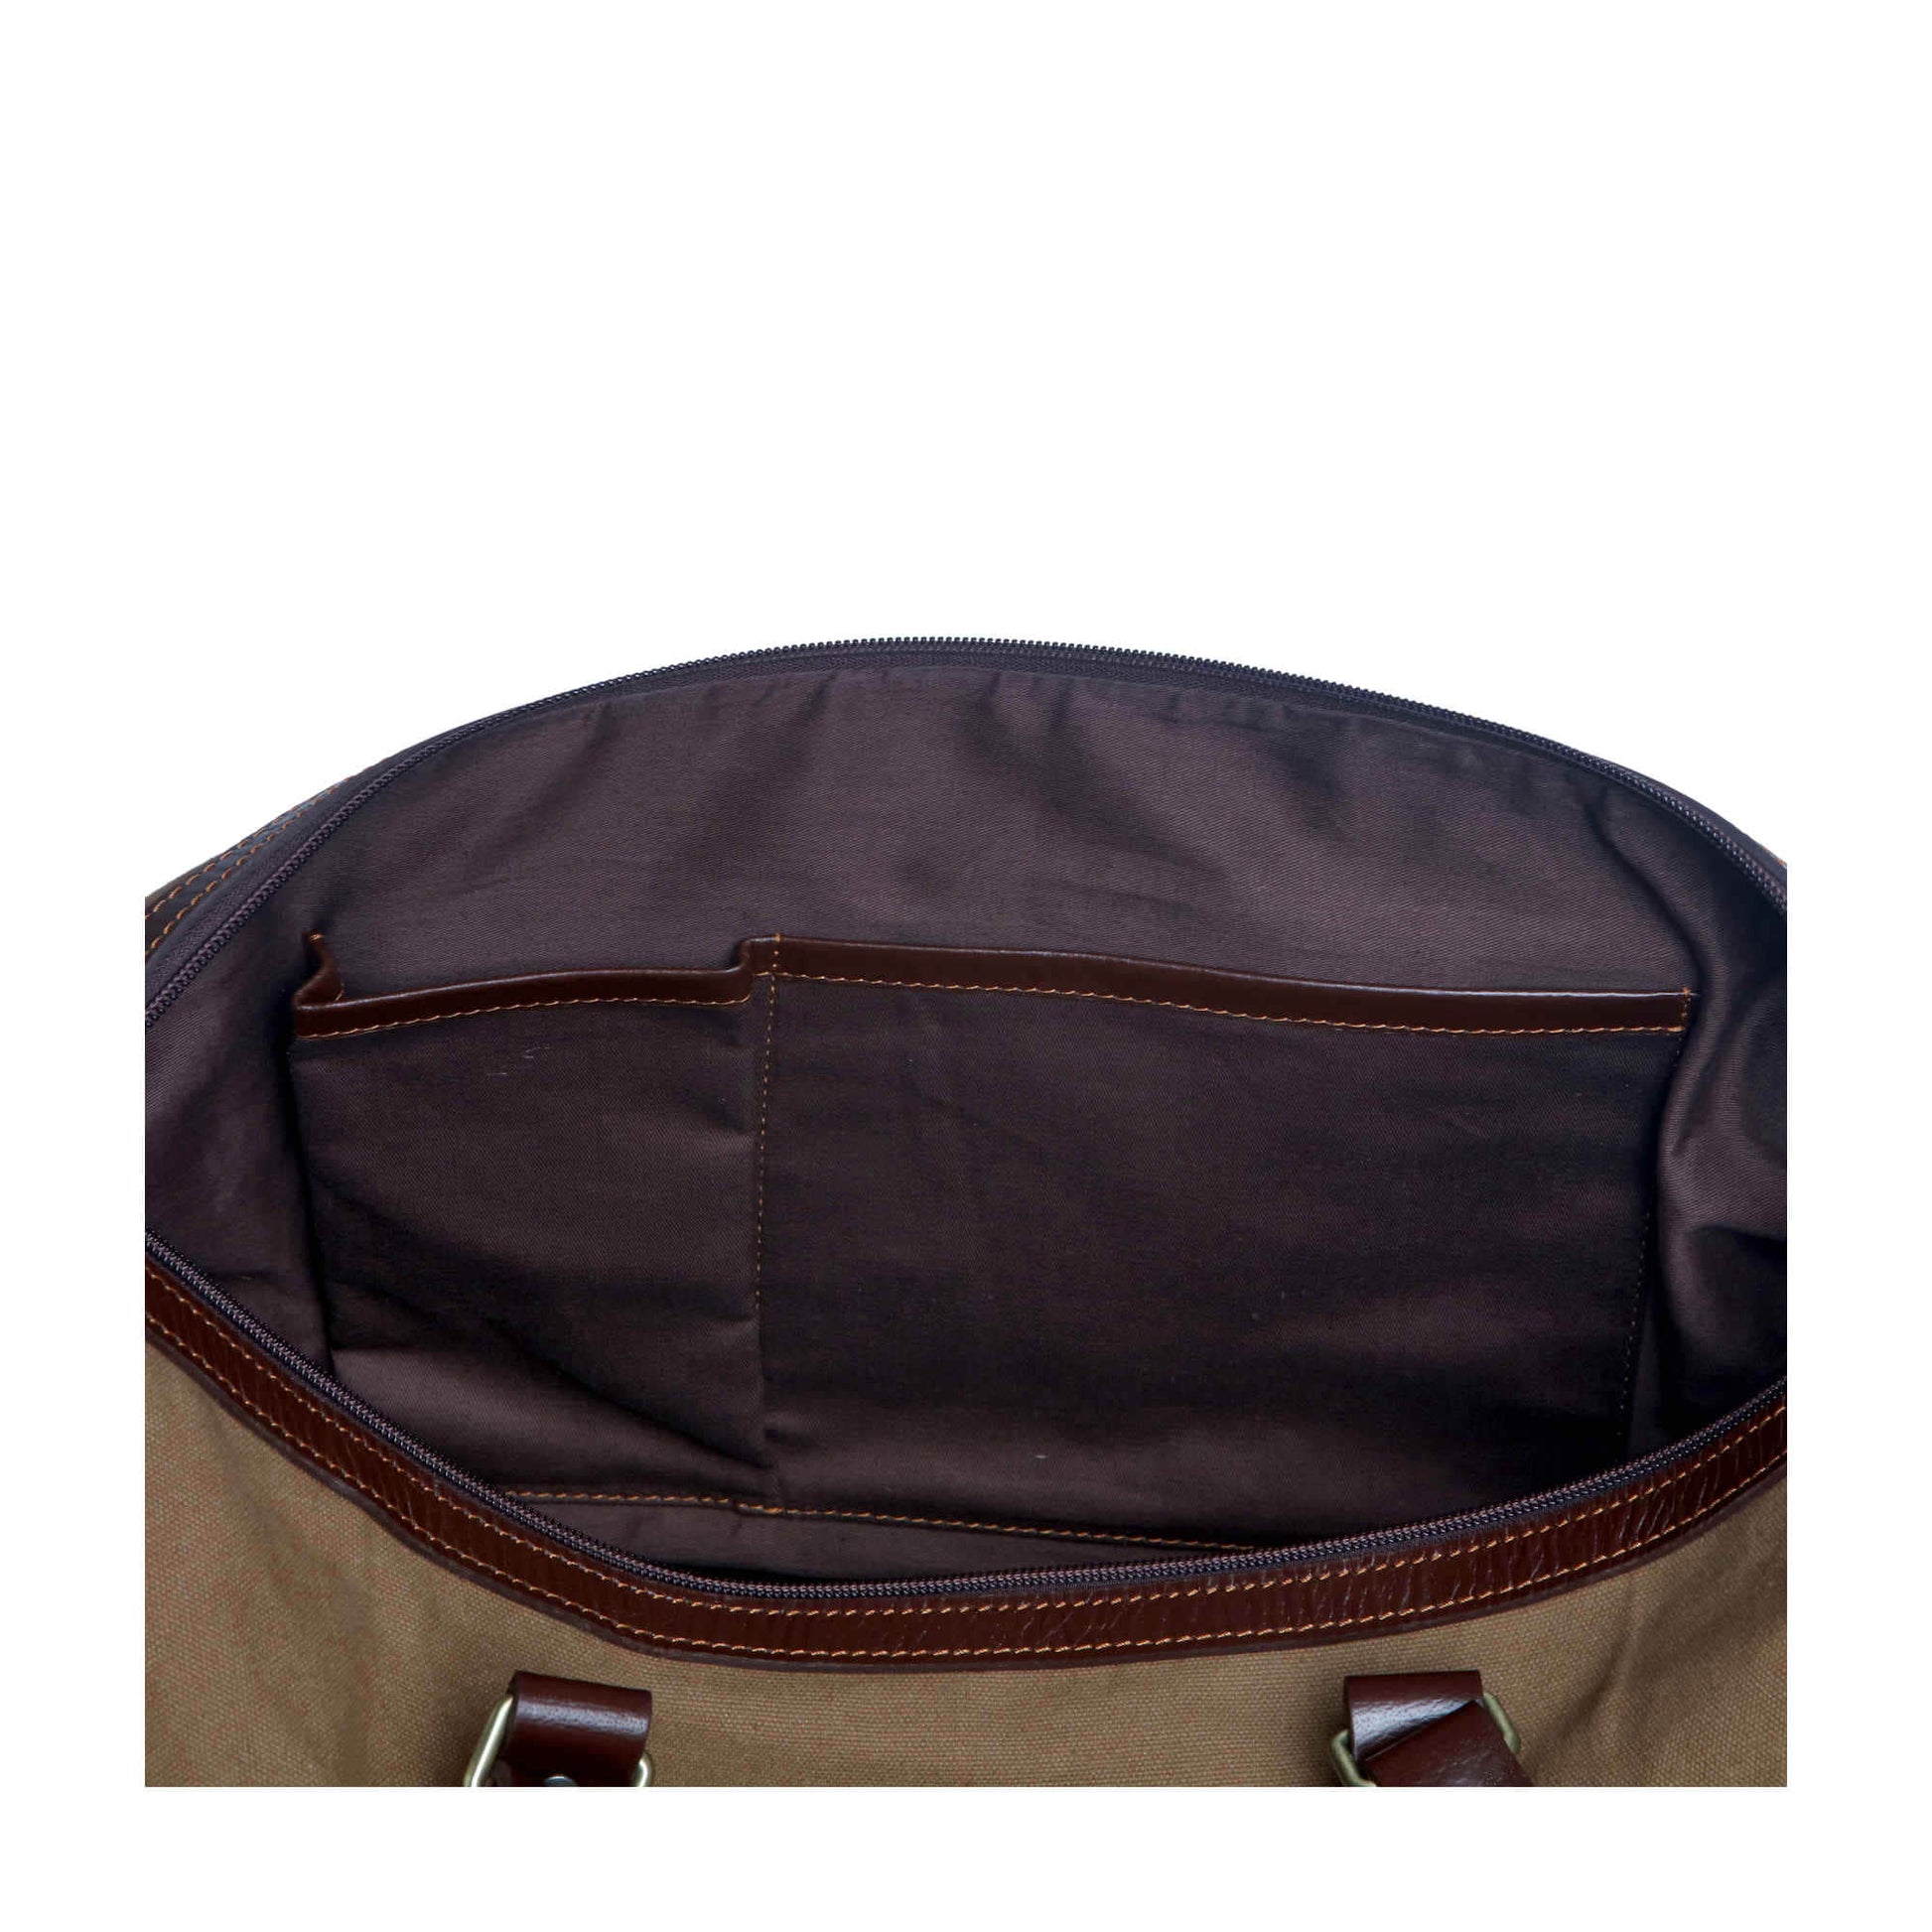 Style n Craft 397101 Duffle Bag in Waterproof Brown Canvas & Full Grain Leather - Internal Front Wall View Showing the 2 Open Slip Pockets